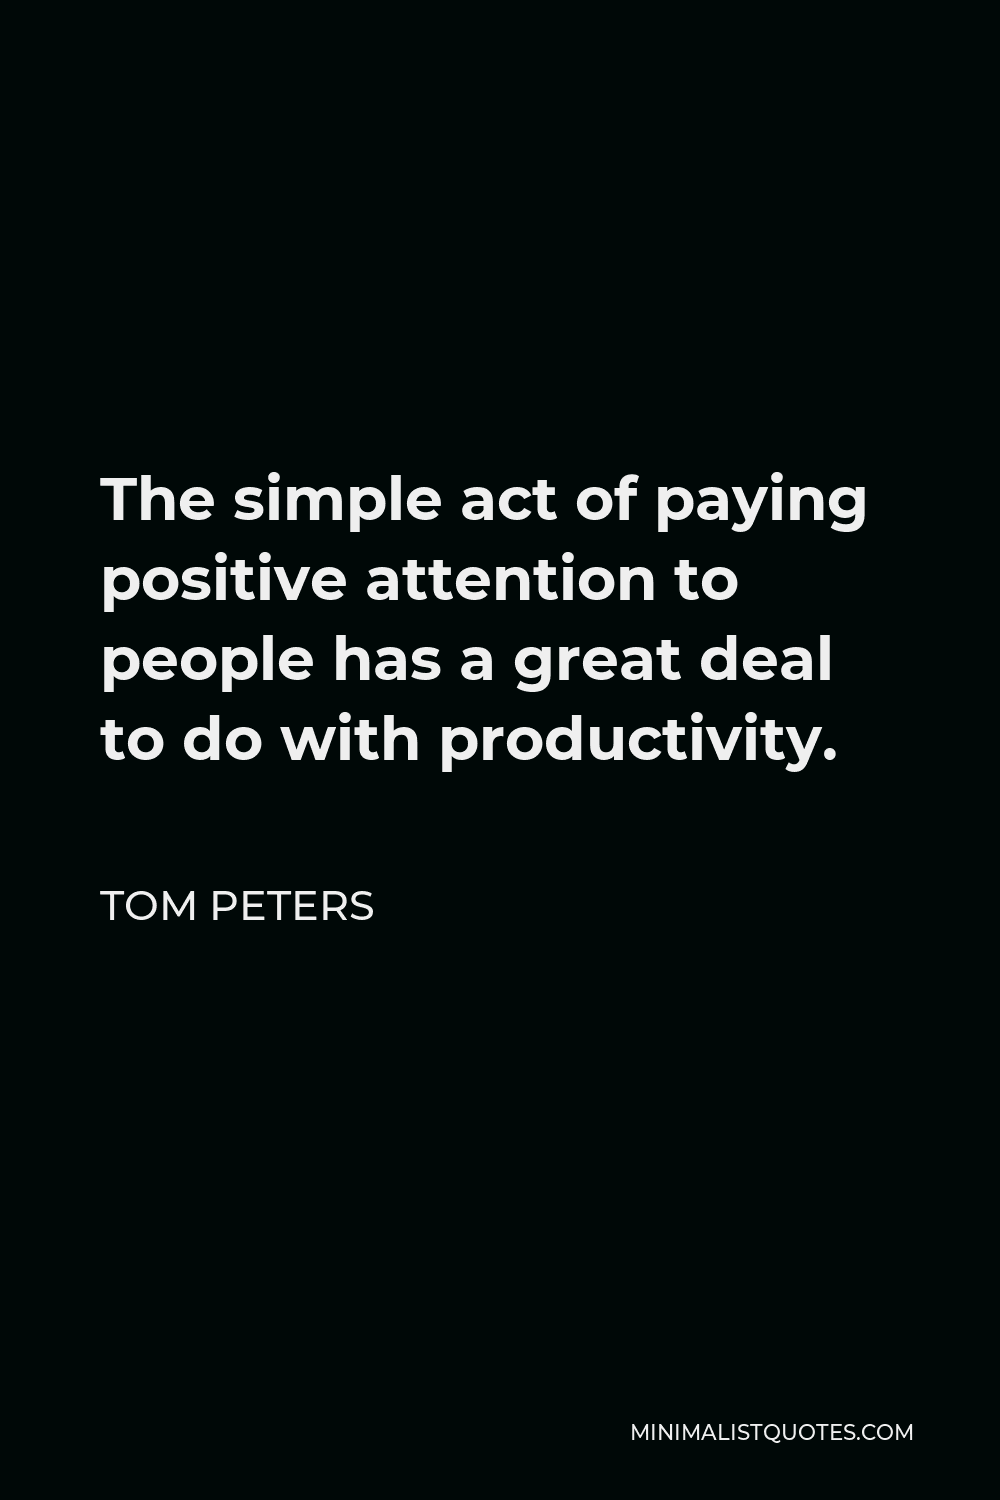 Tom Peters Quote - The simple act of paying positive attention to people has a great deal to do with productivity.